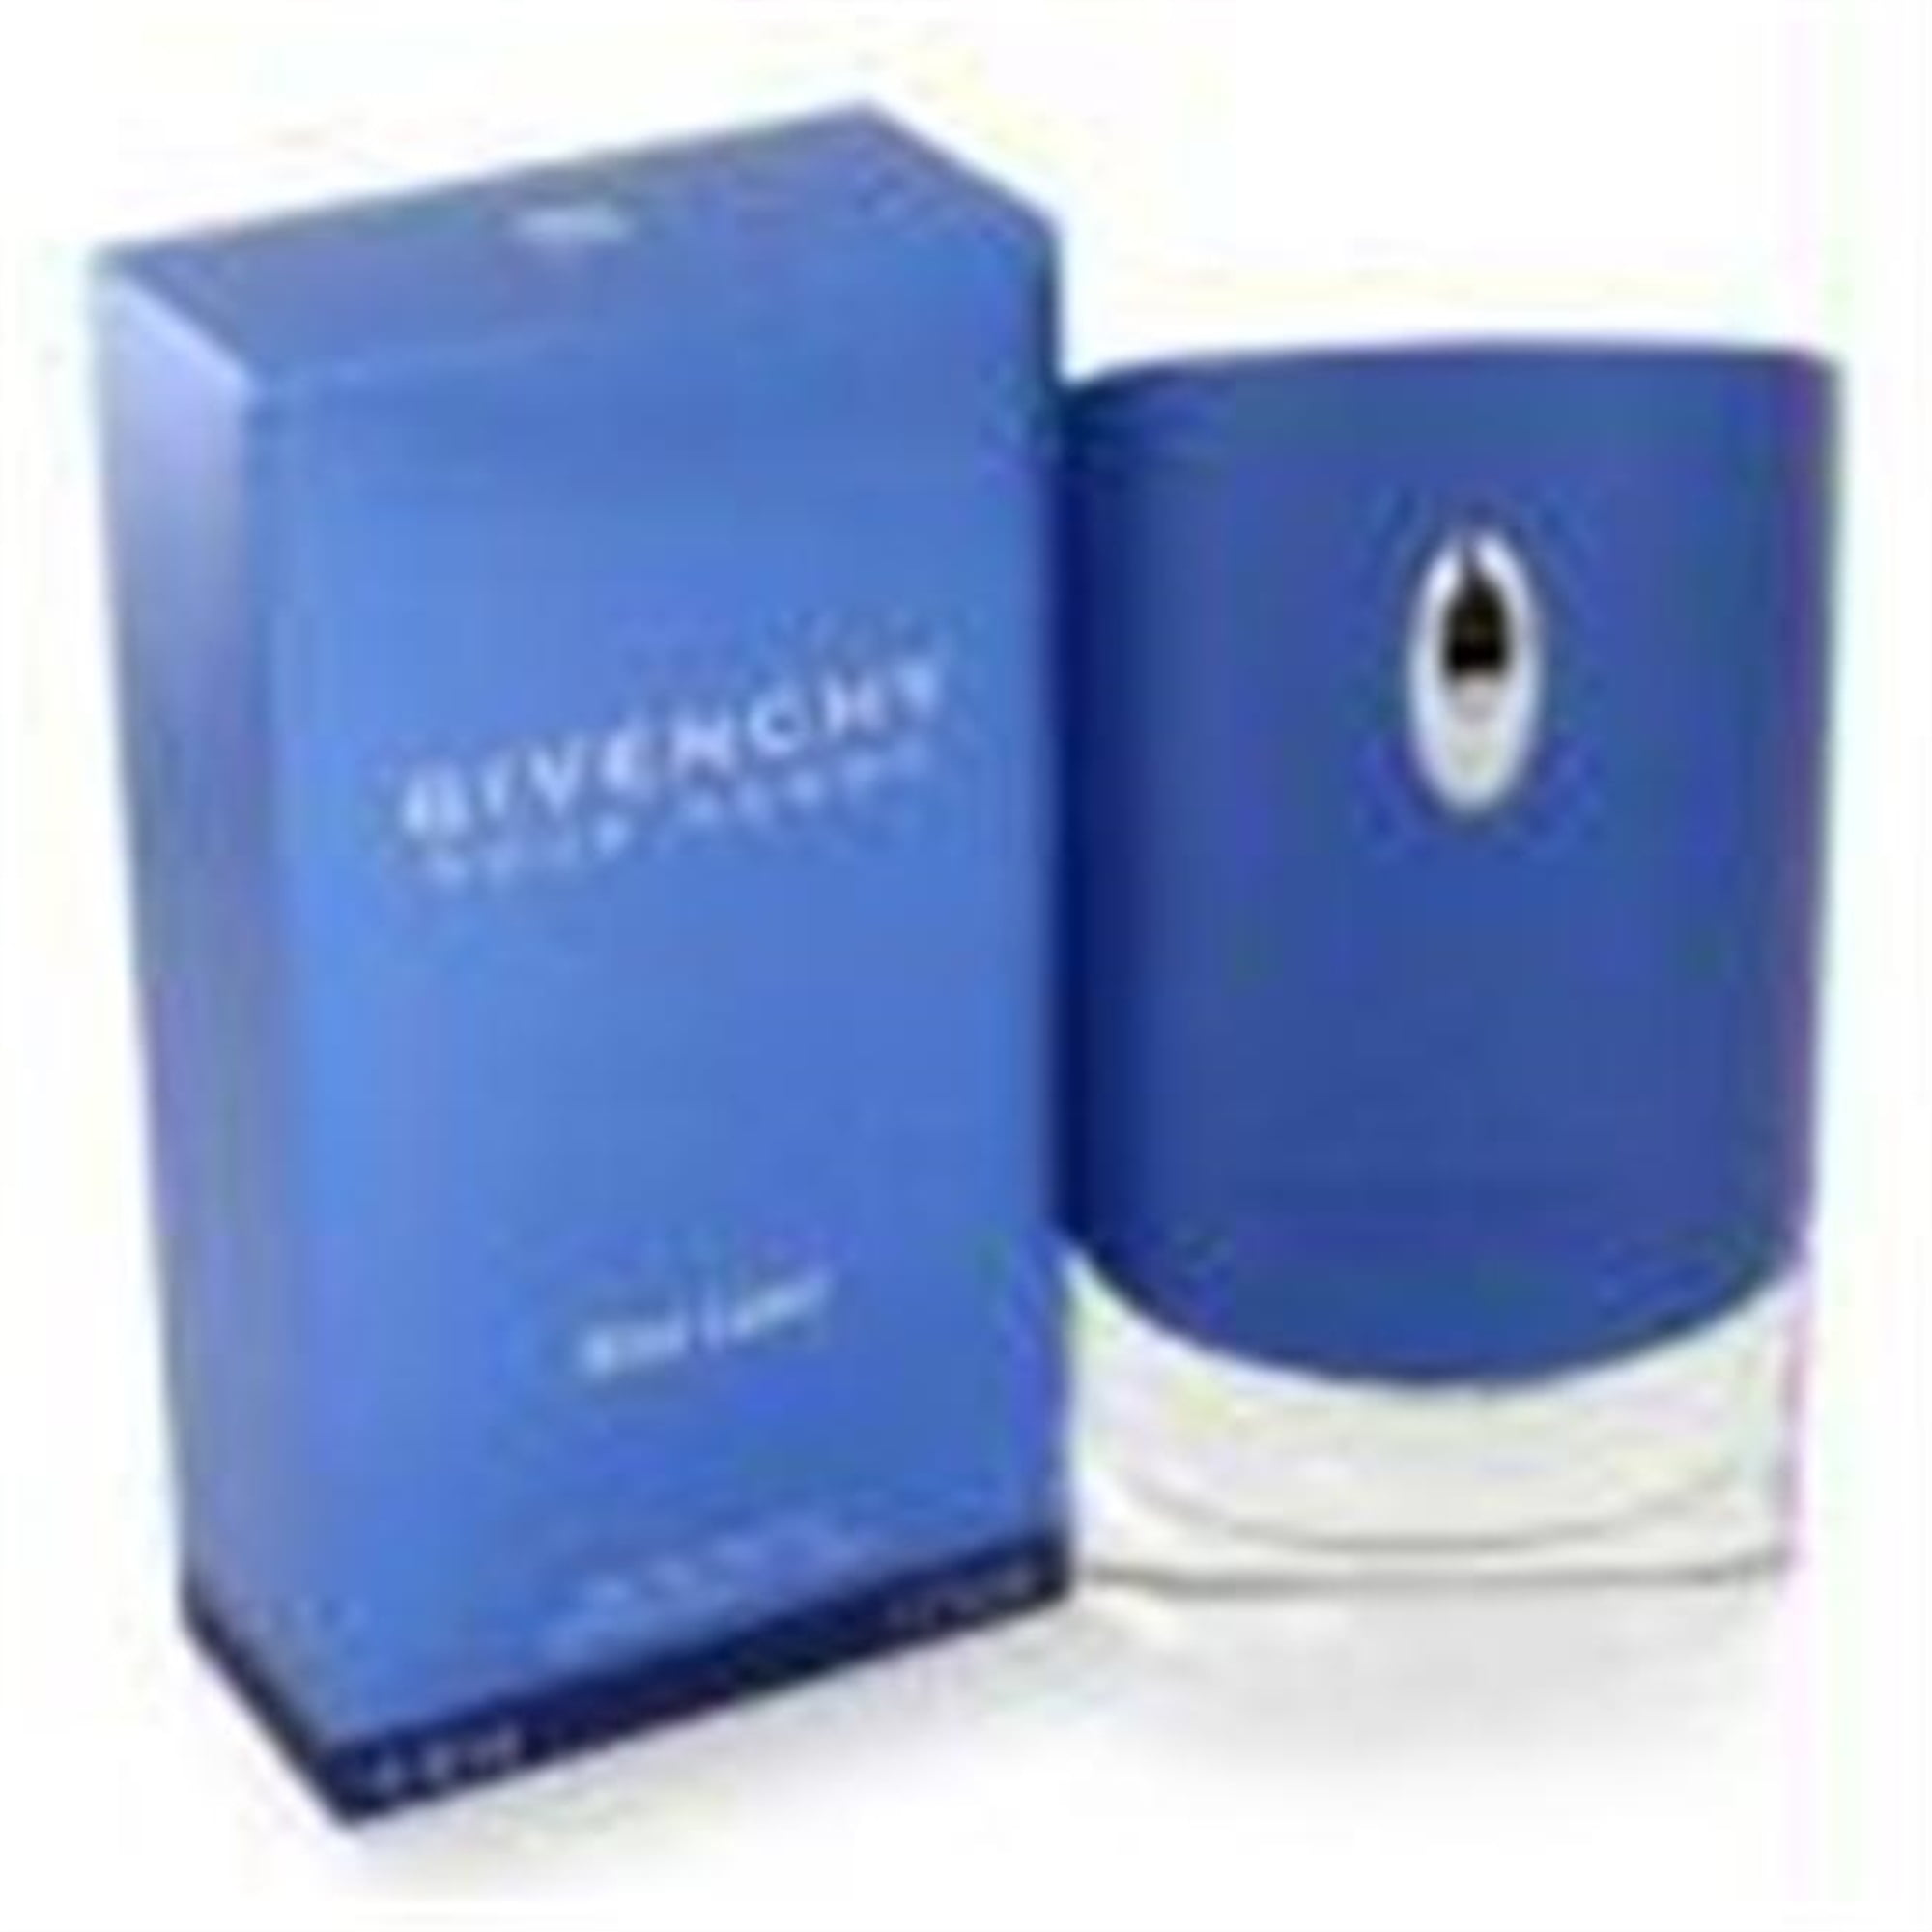 blue label givenchy 100ml